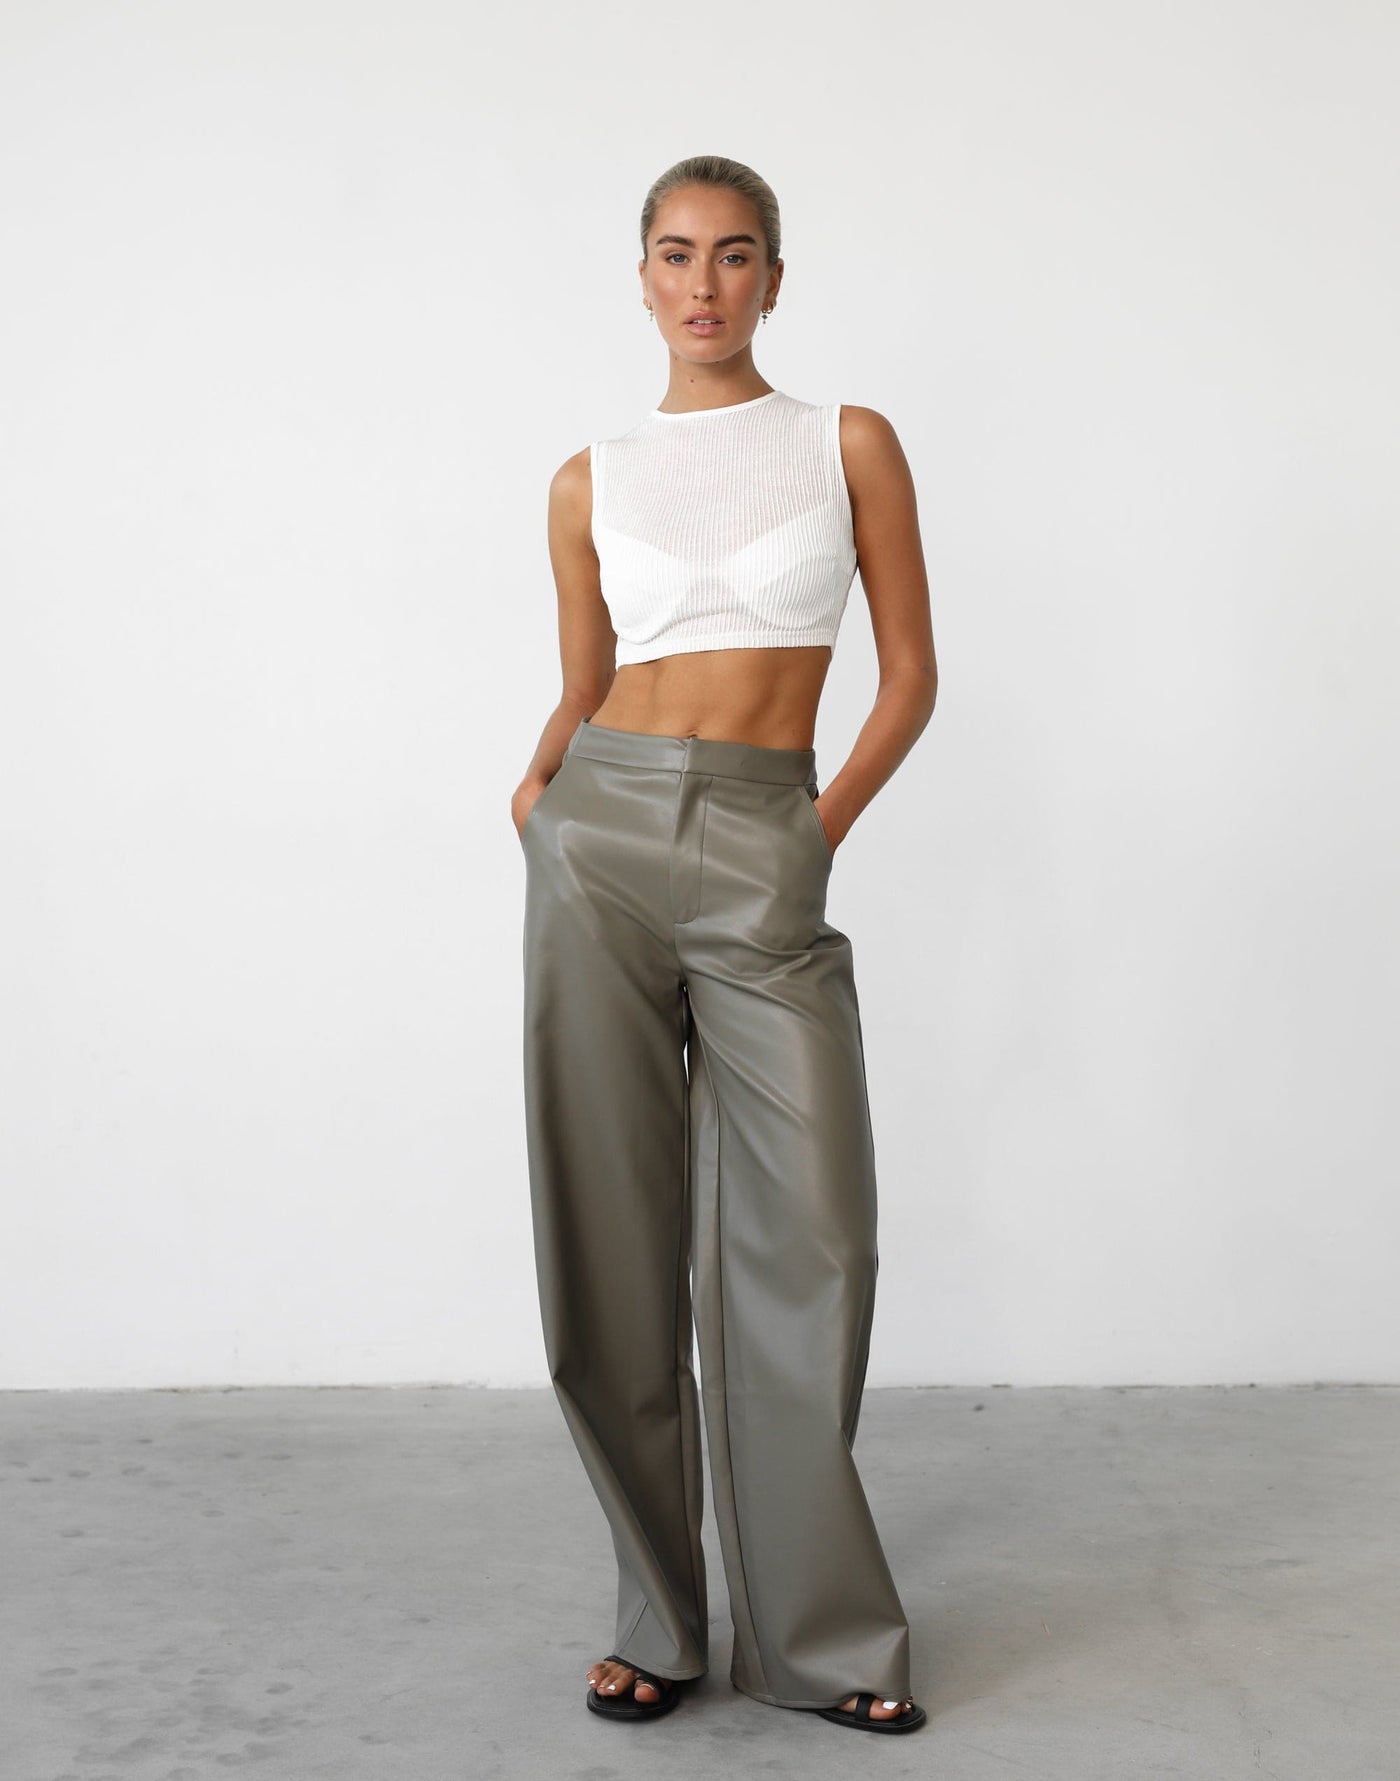 Kinetic Crop Top (White) - High Neck Textured Crop Top - Women's Top - Charcoal Clothing